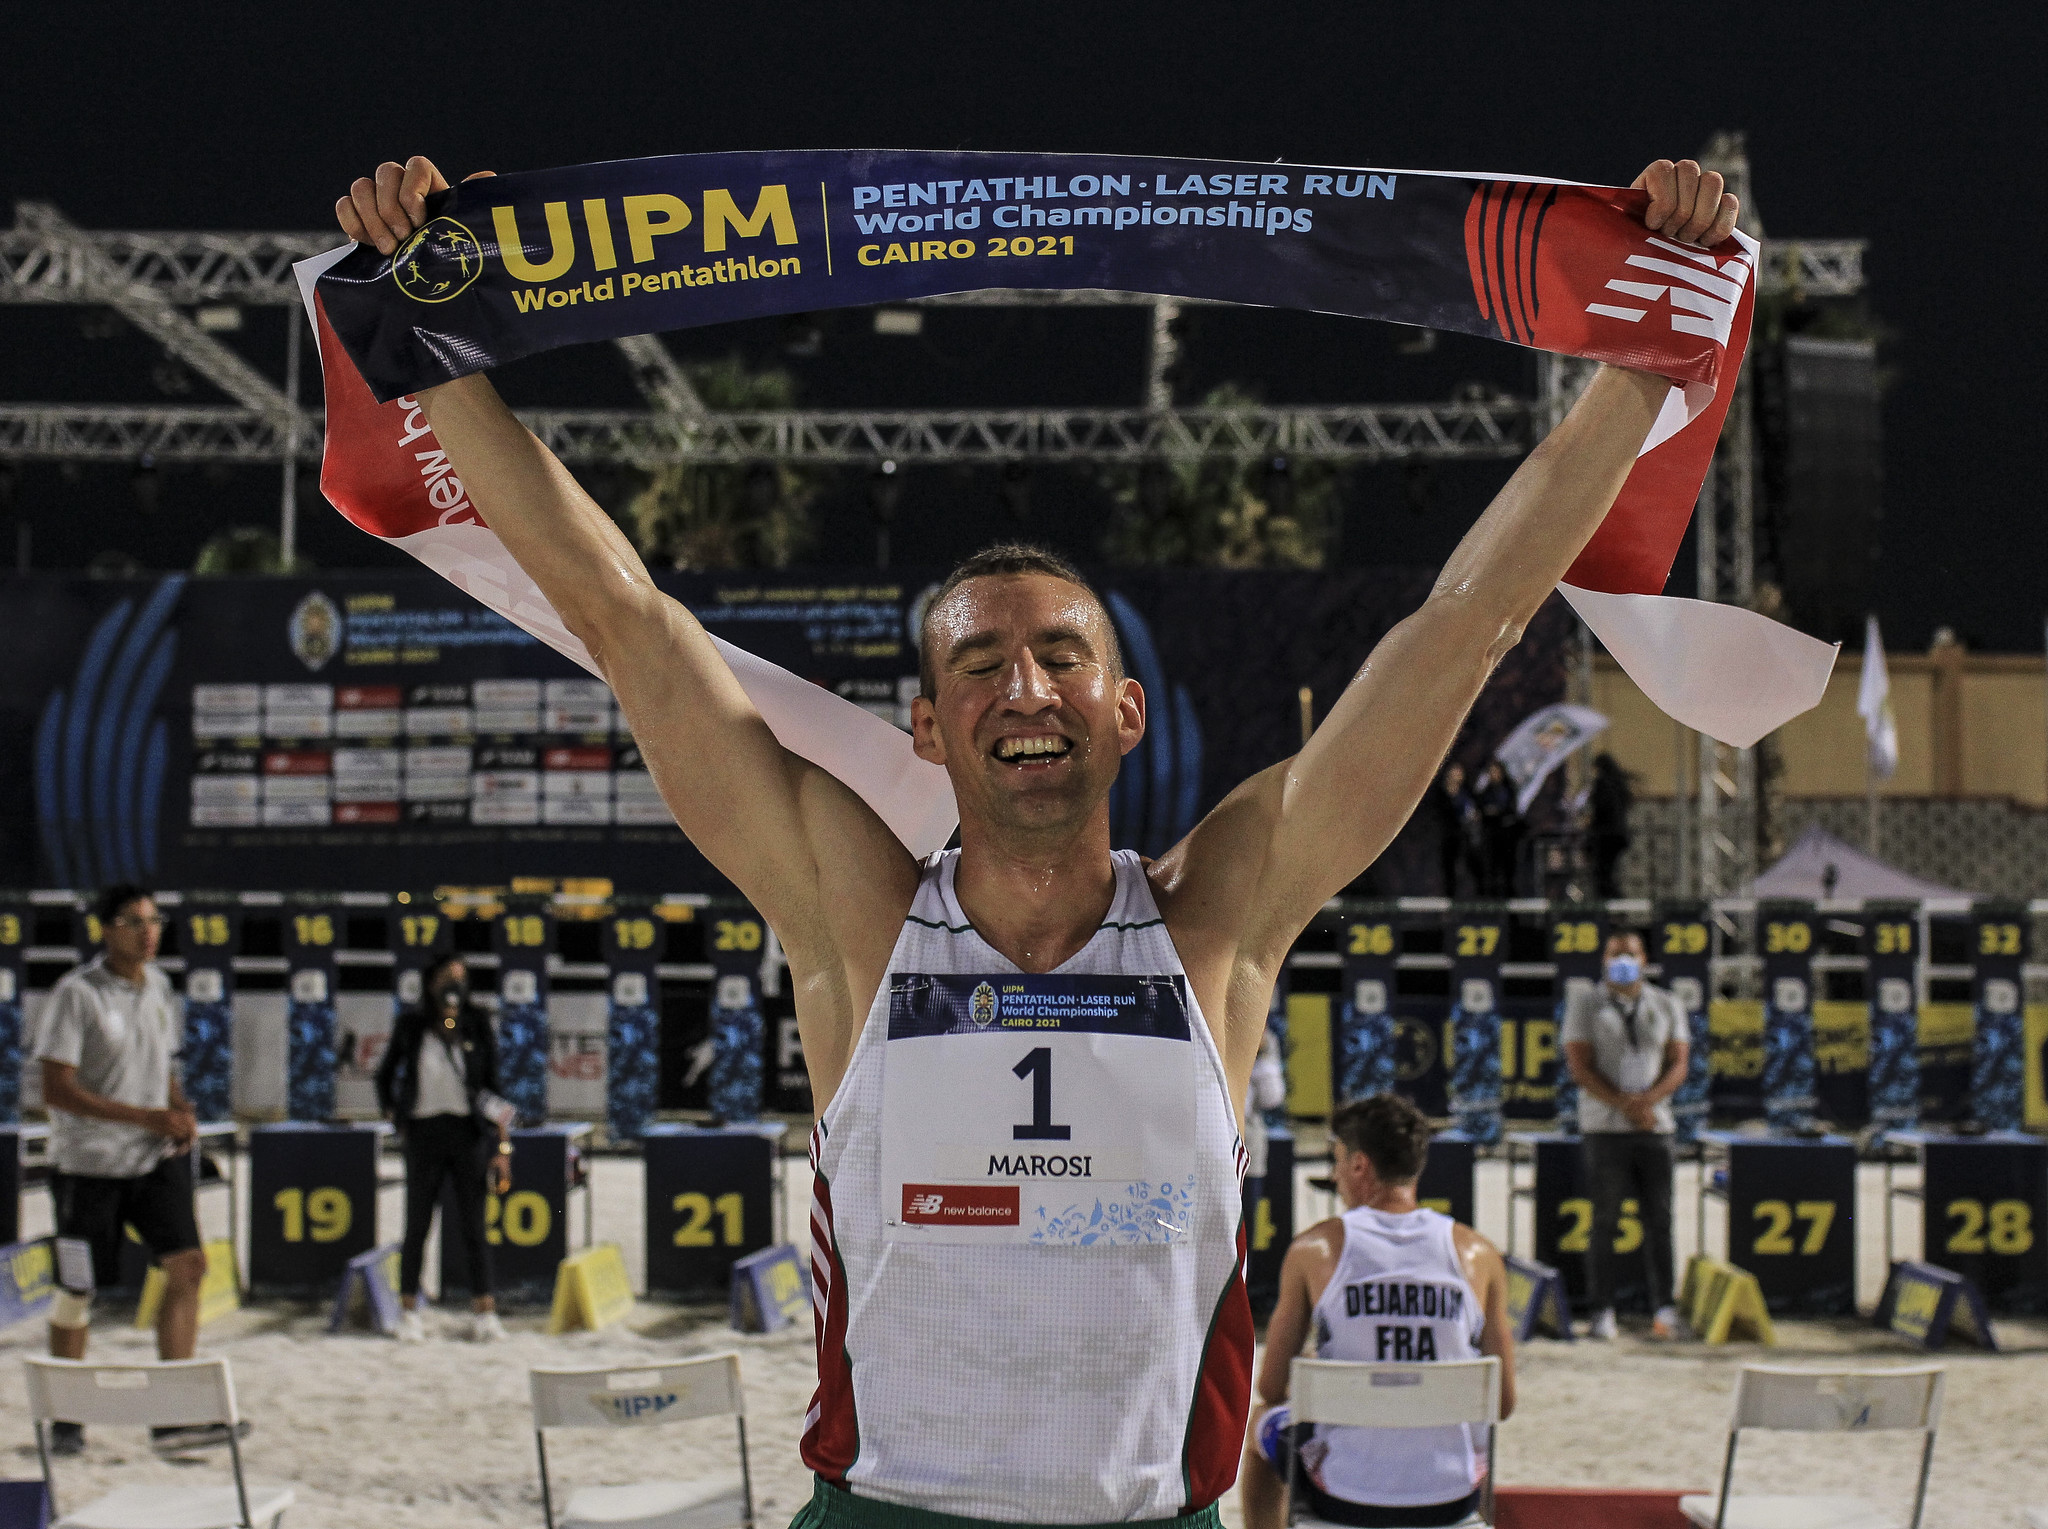 Marosi, 36, wins second career gold at UIPM World Championships in Cairo